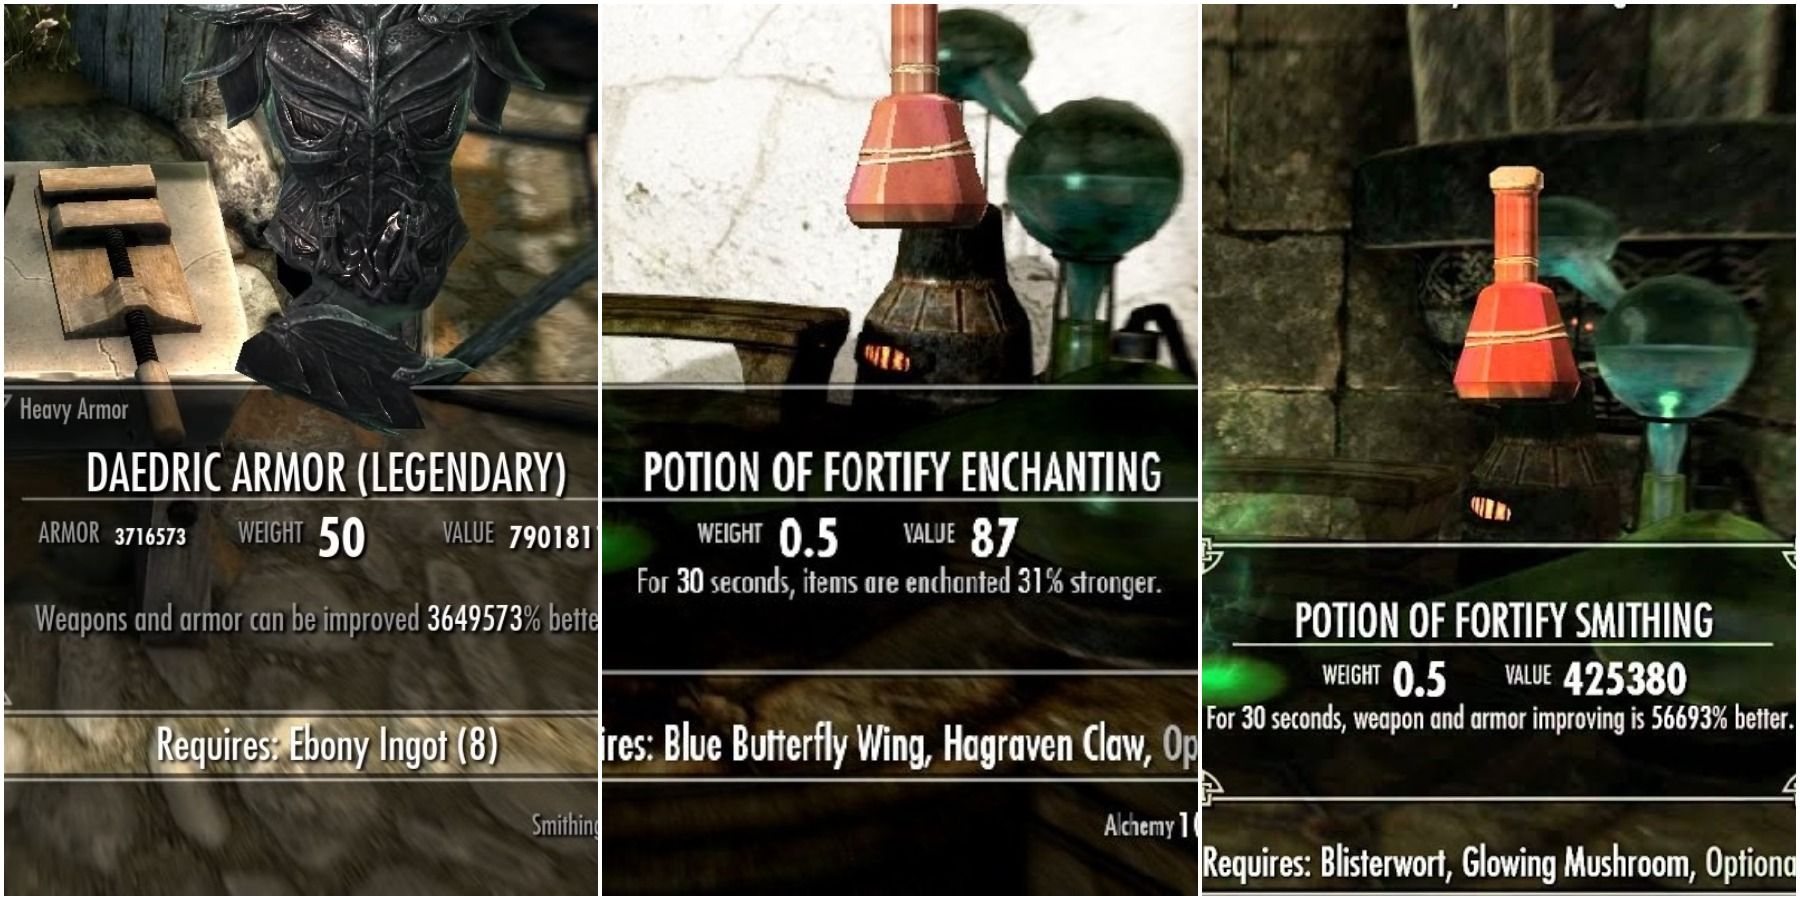 Skyrim Potion of Smithing, Potion of Enchanting and Improved Armor via Exploit